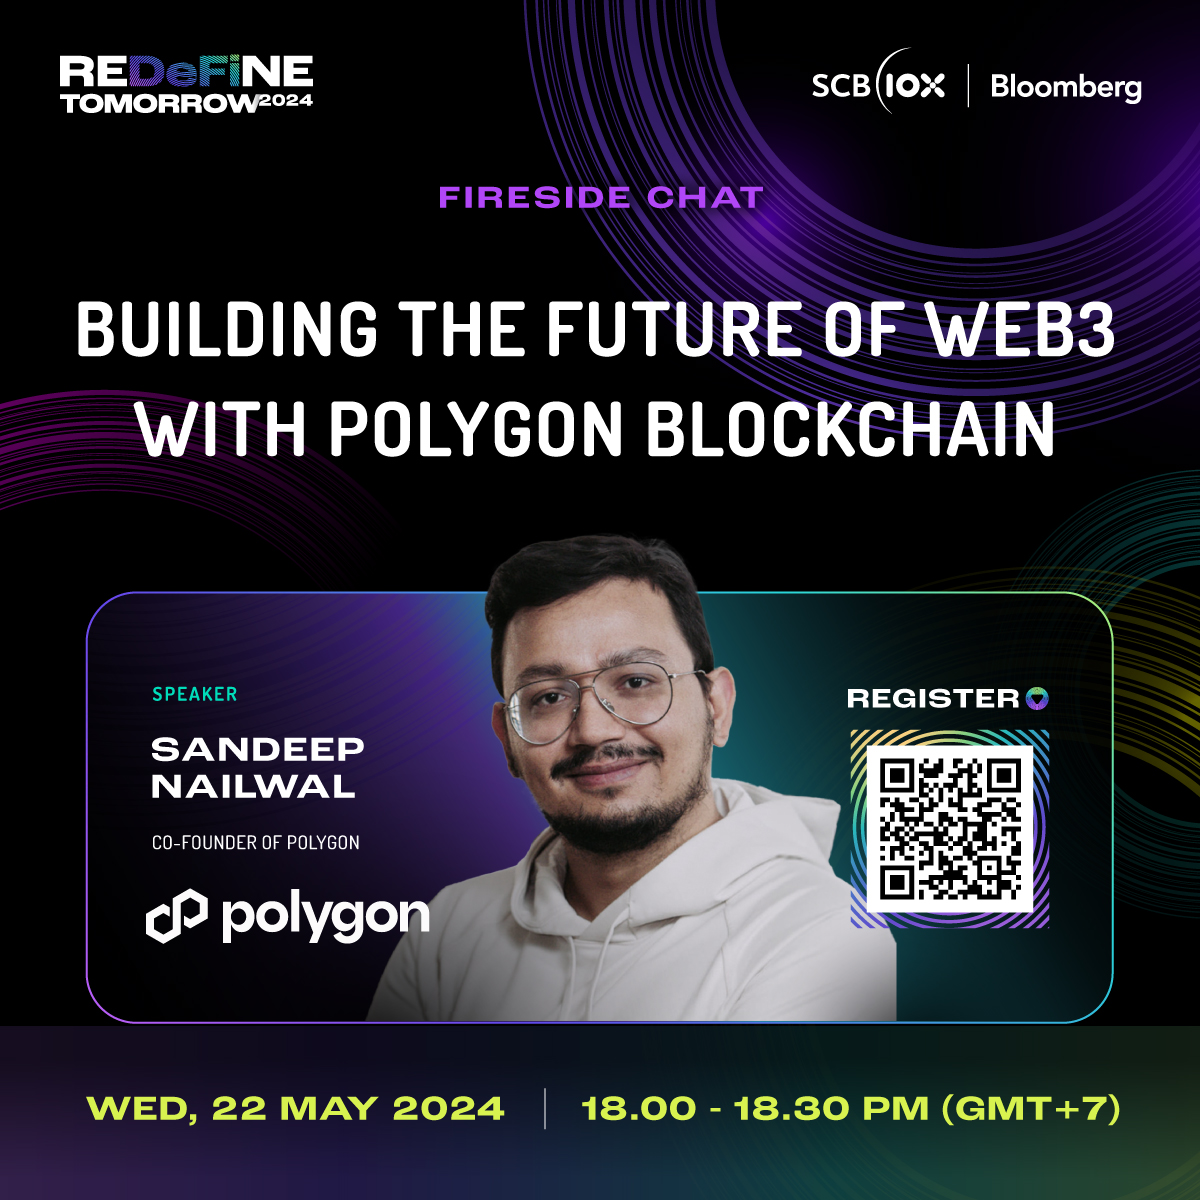 Meet the speaker at #REDeFiNETOMORROW2024 / 21-22 May 2024 Fireside Chat: Building the Future of Web3 With Polygon Blockchain @sandeepnailwal of @0xPolygon Free ticket: bloombergevents.com/SCB10x_2024